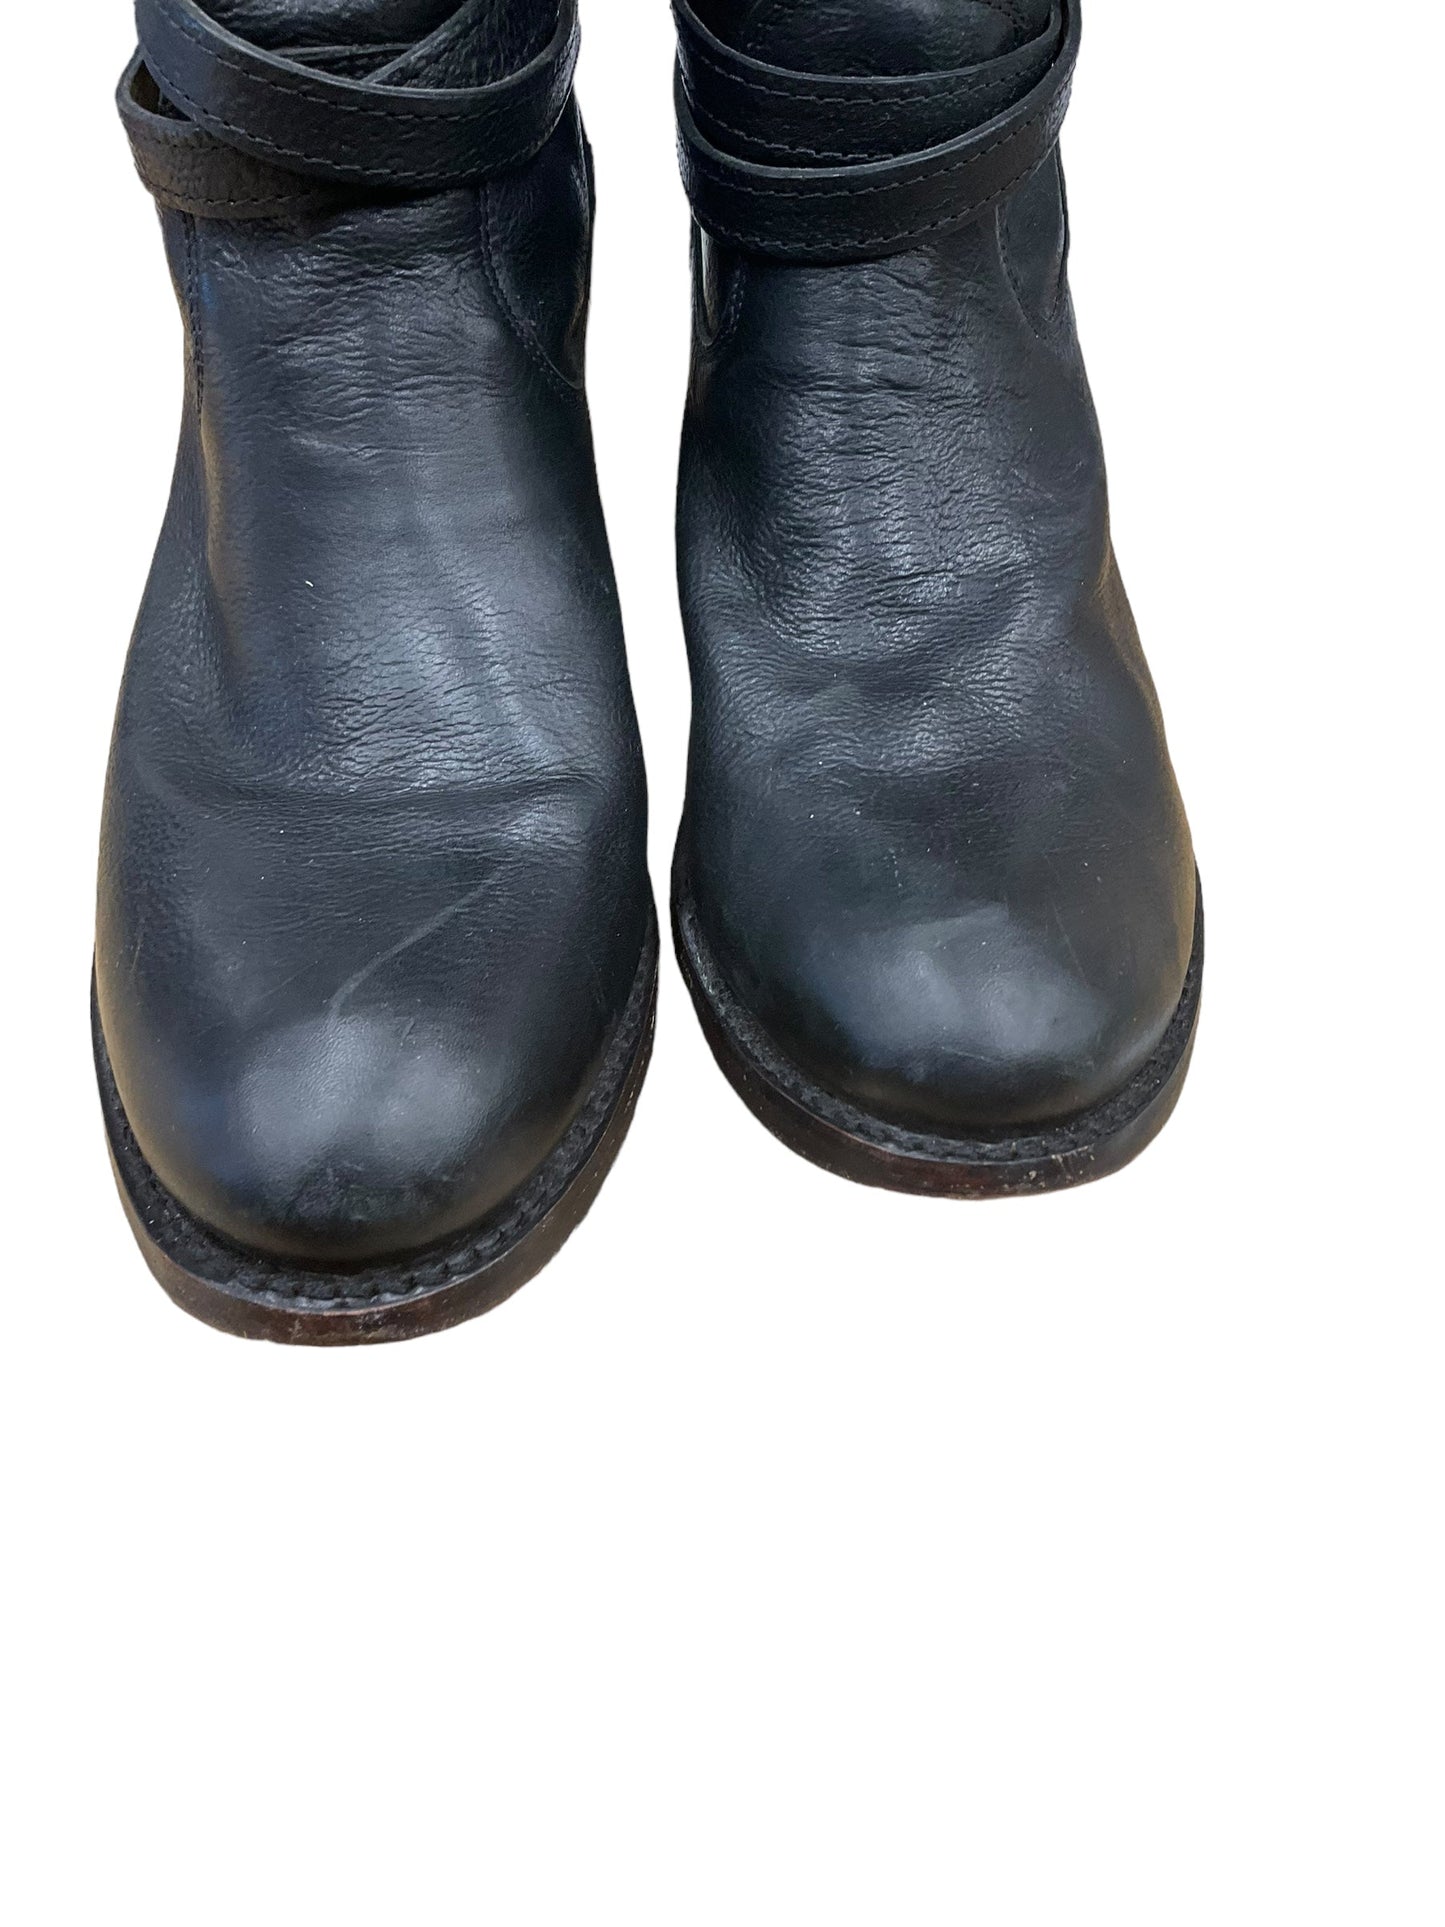 Black Boots Leather Frye, Size 11